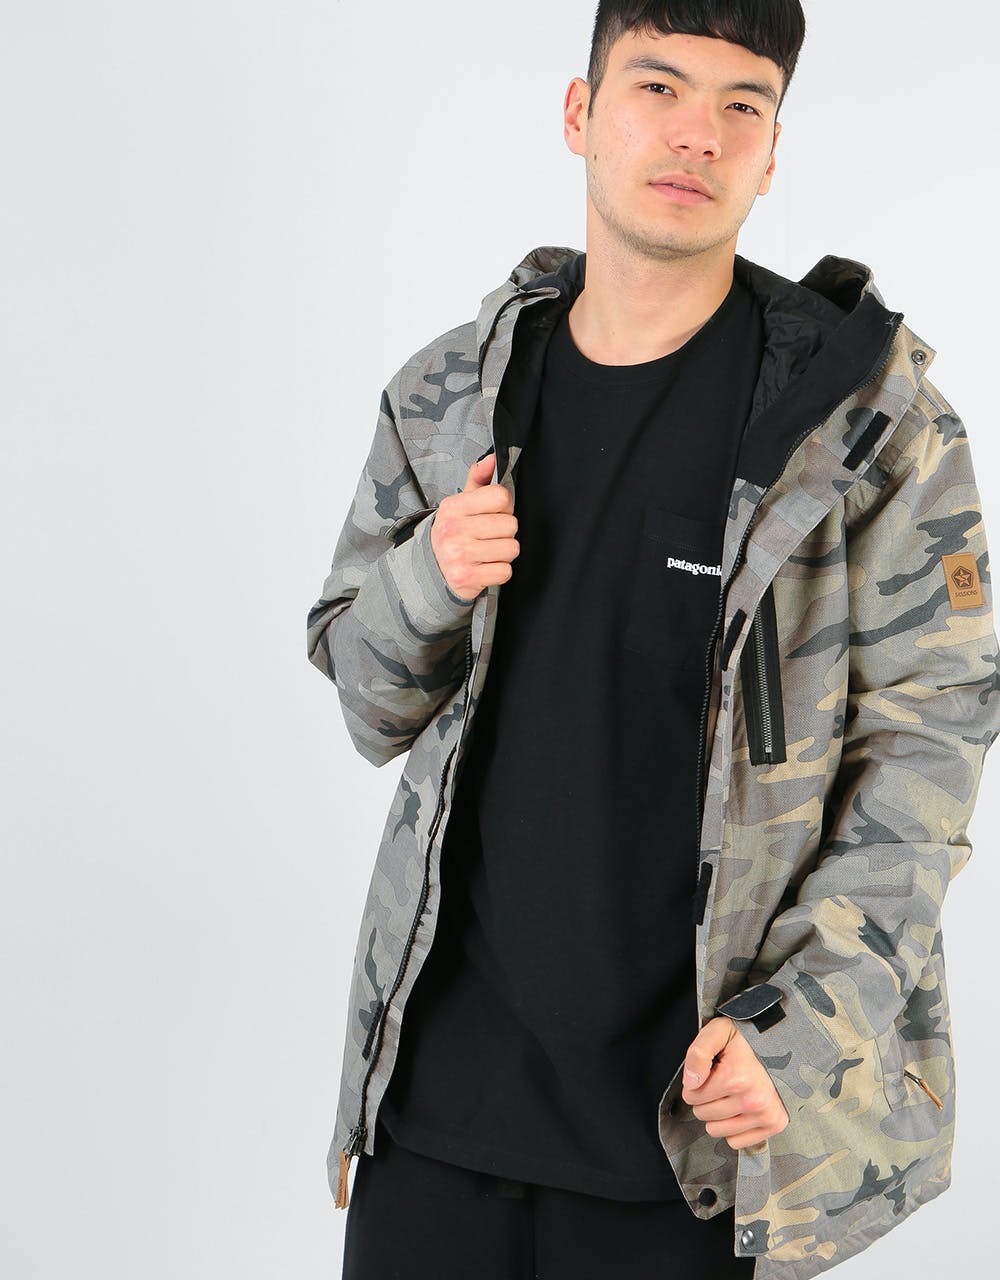 Sessions Scout Snowboard Jacket - Green Camo